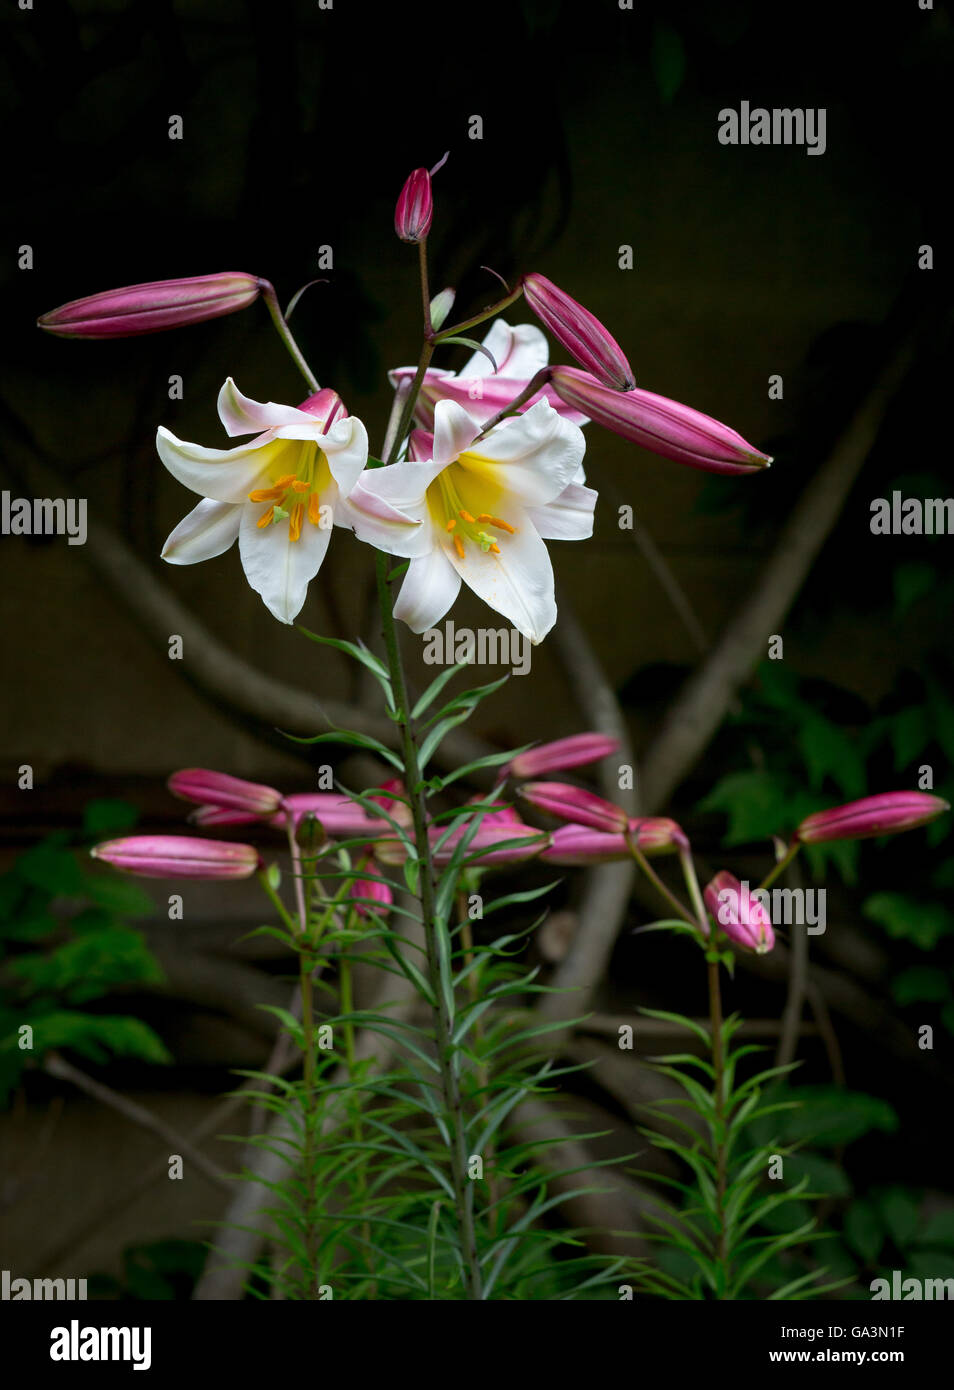 White and yellow 'Kings Lily' flower or Regal Lily (Lilium Regale) with buds, stems and natural foliage Stock Photo